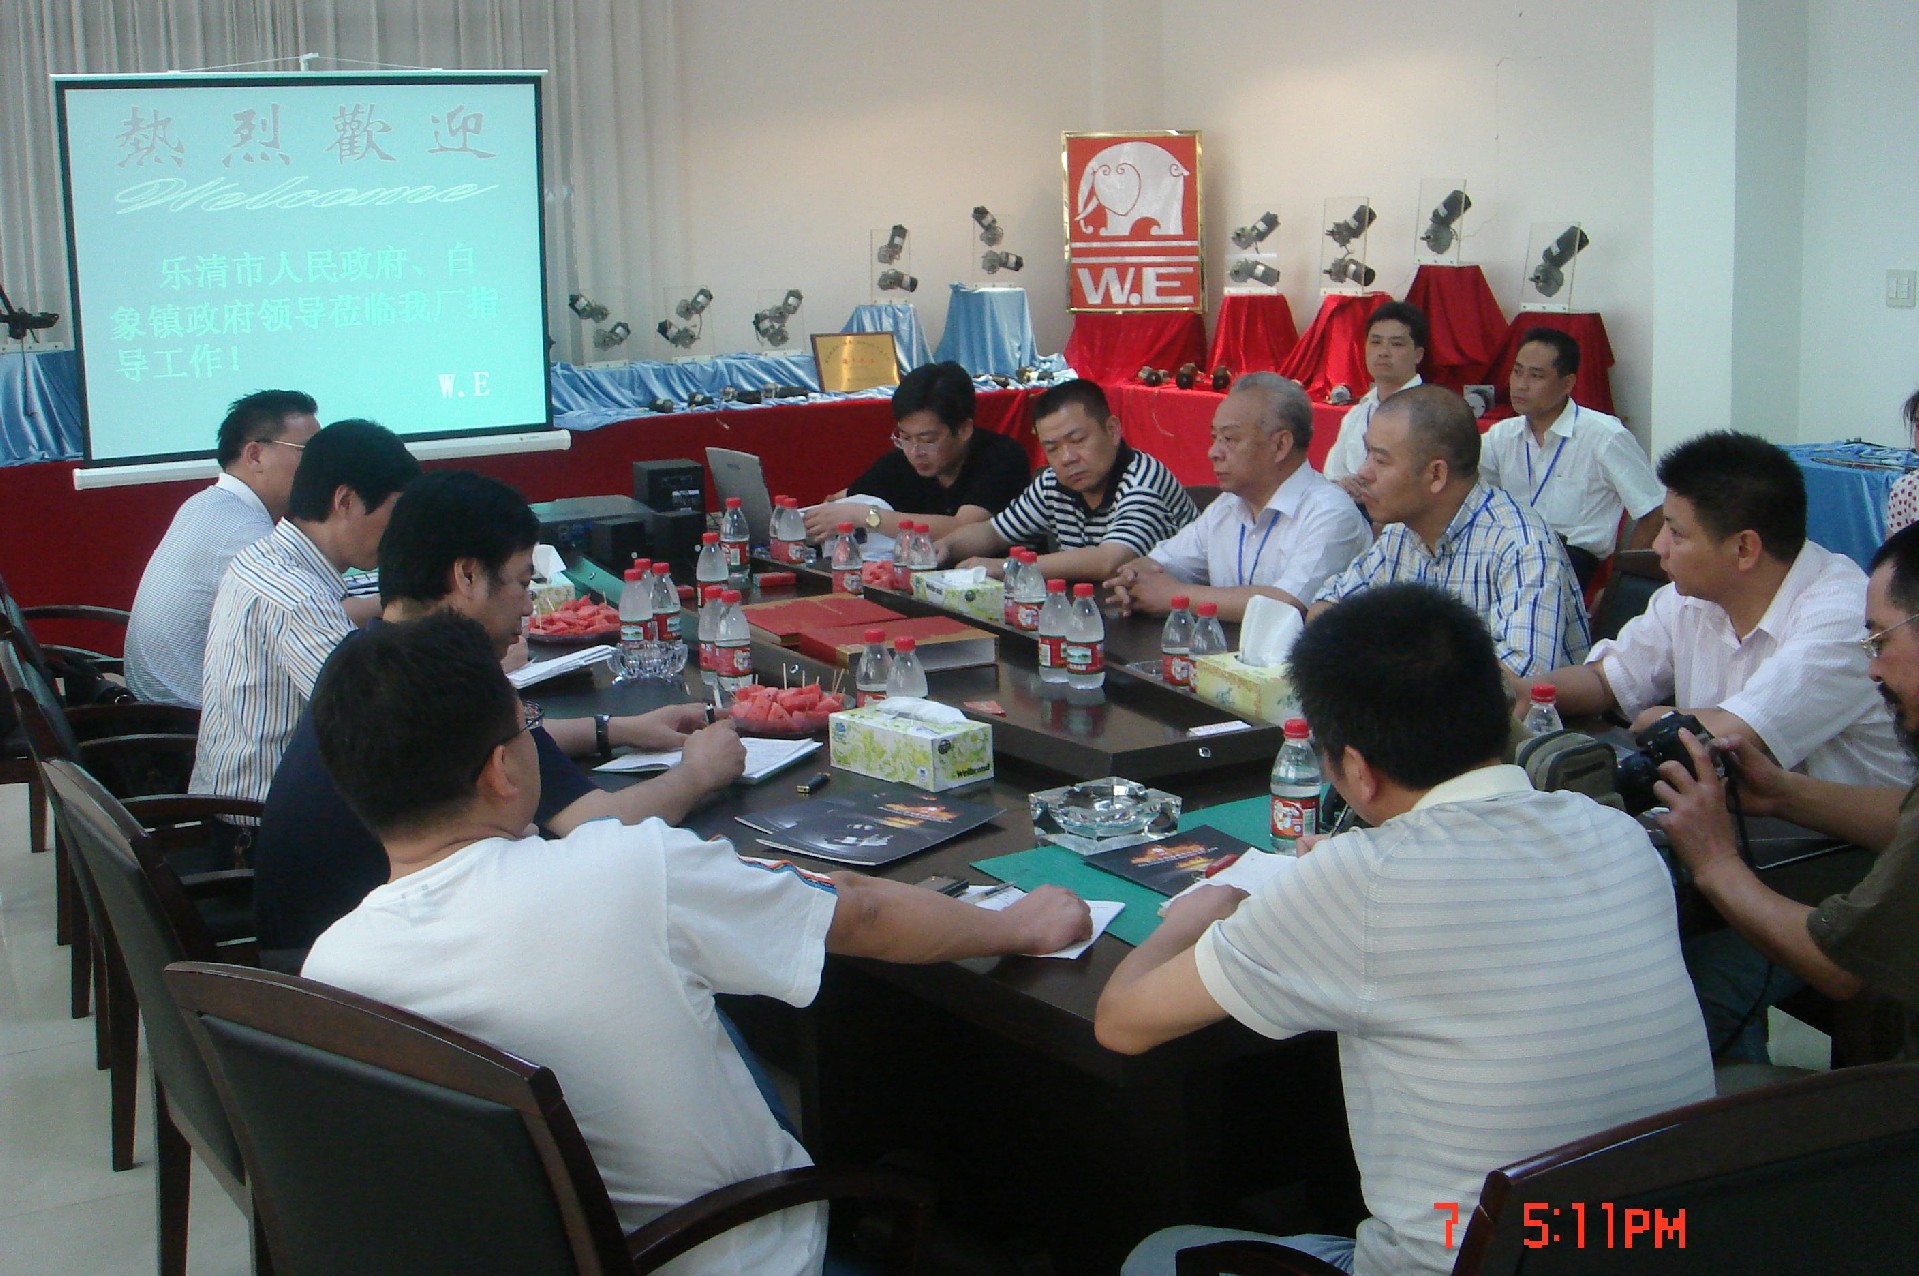 In 2008, Yueqing Municipal People's Government and Baixiang Town government leaders visited our factory to guide our work